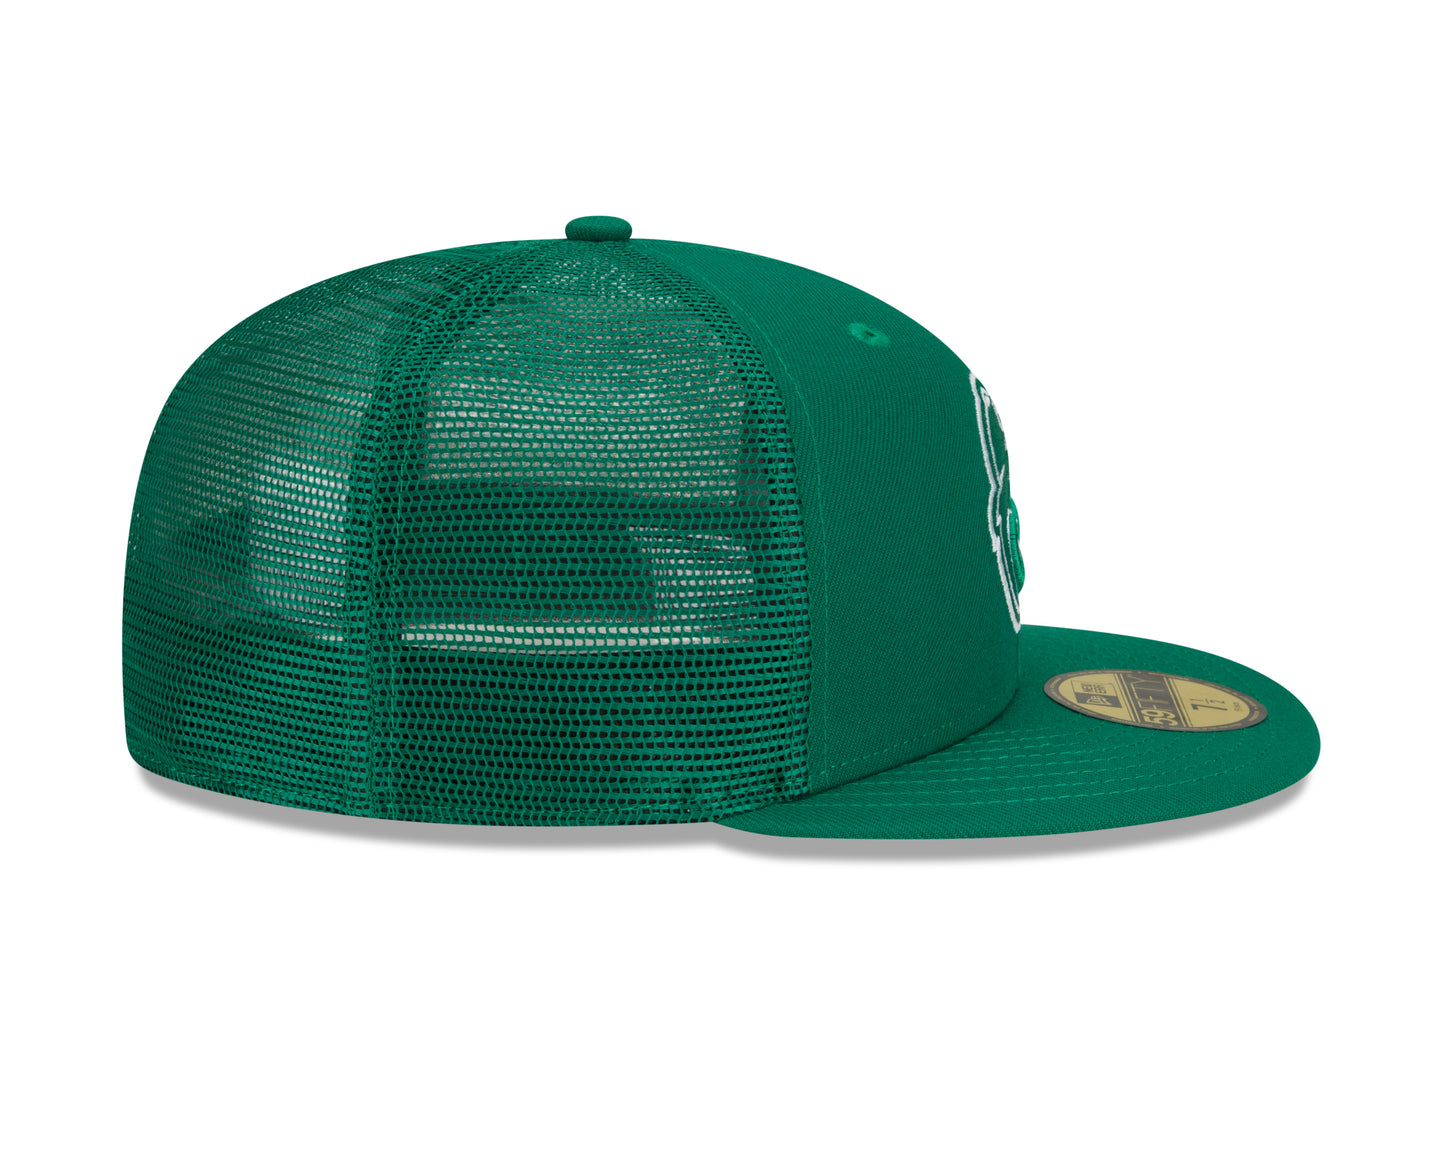 Baltimore Orioles New Era St. Patricks Day 59FIFTY Mesh Fitted Hat - Green